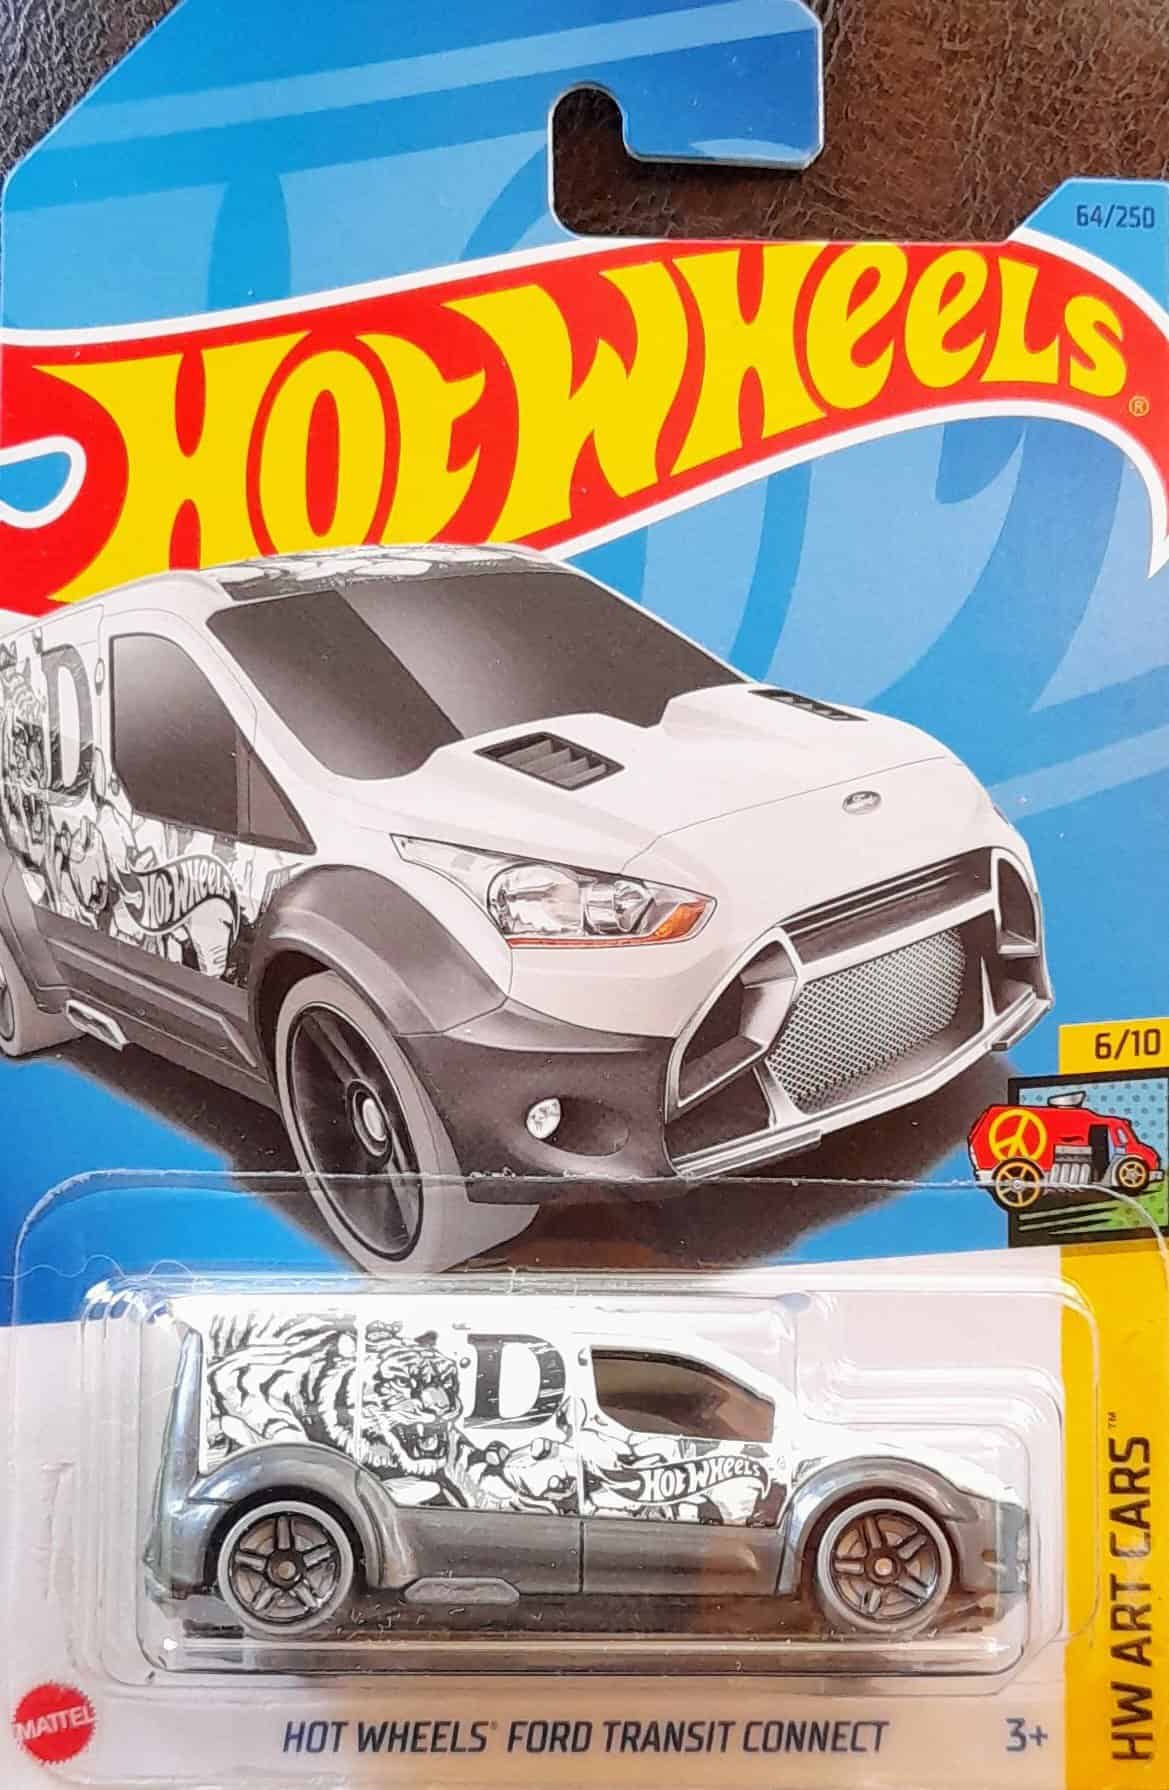 Hot Wheels Art Cars Ford Transit Connect Universo Hot Wheels